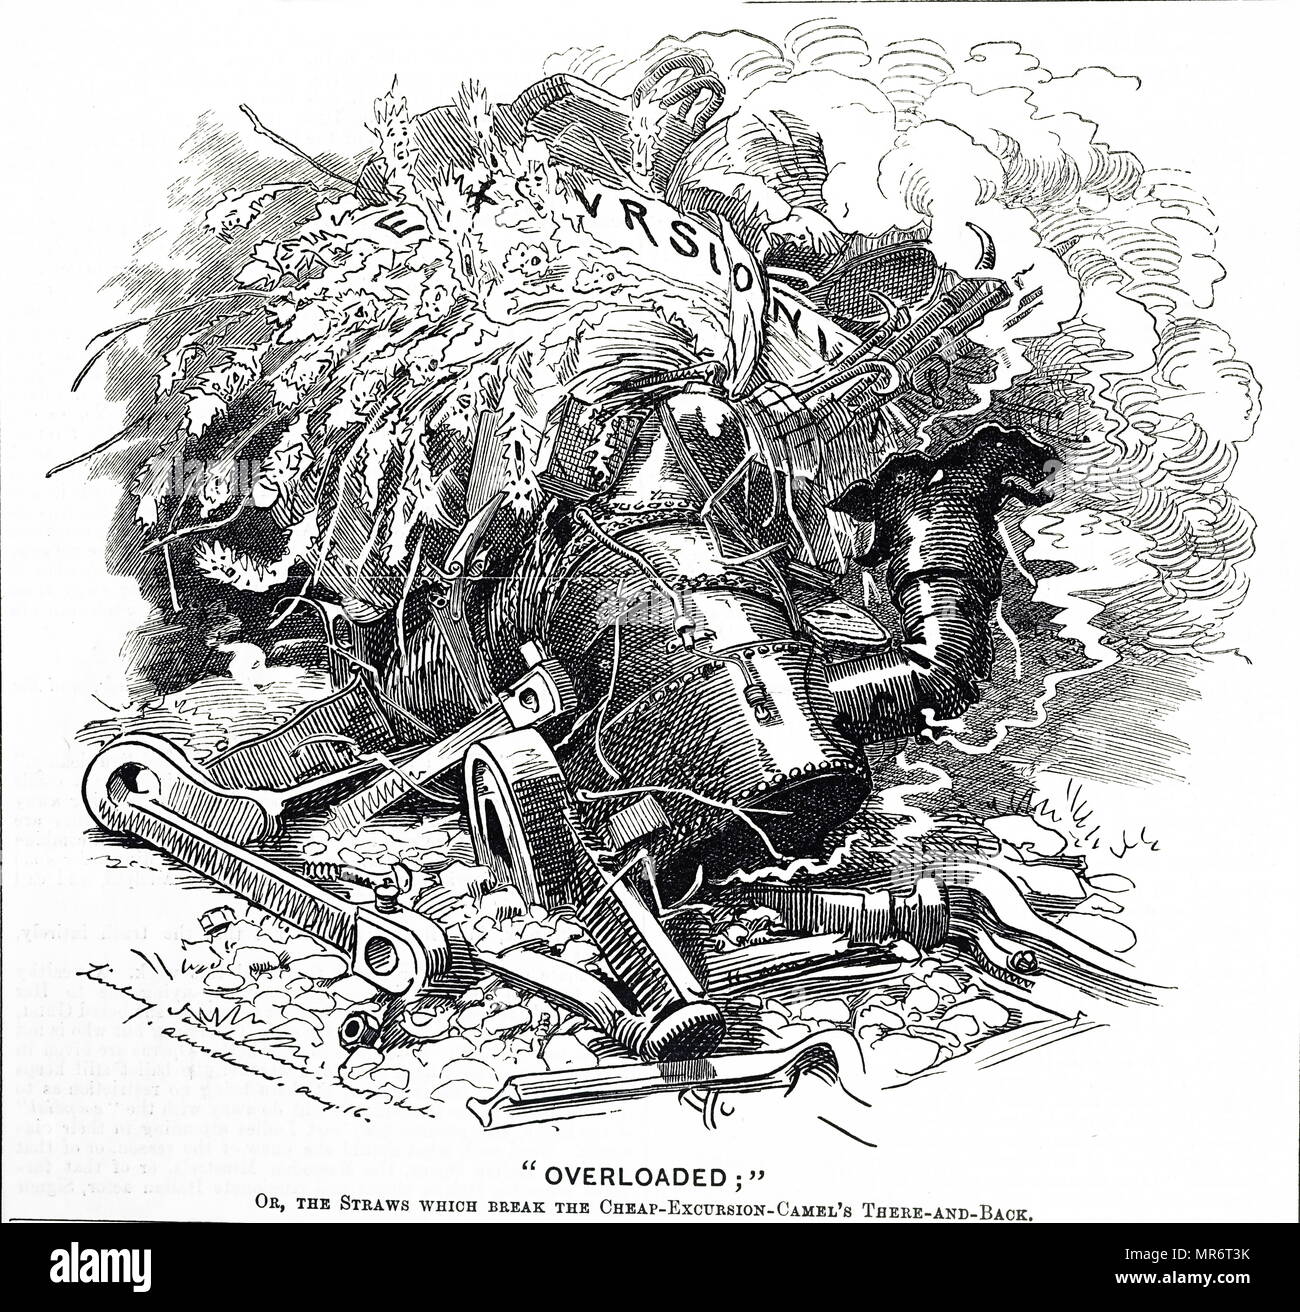 Cartoon titled 'Overloaded'; or the straw that broke the camel's back. The cartoon is commenting on the frequent railway accidents of the time. Illustrated by Edward Linley Sambourne (1844-1910) an English cartoonist and illustrator. Dated 19th century Stock Photo